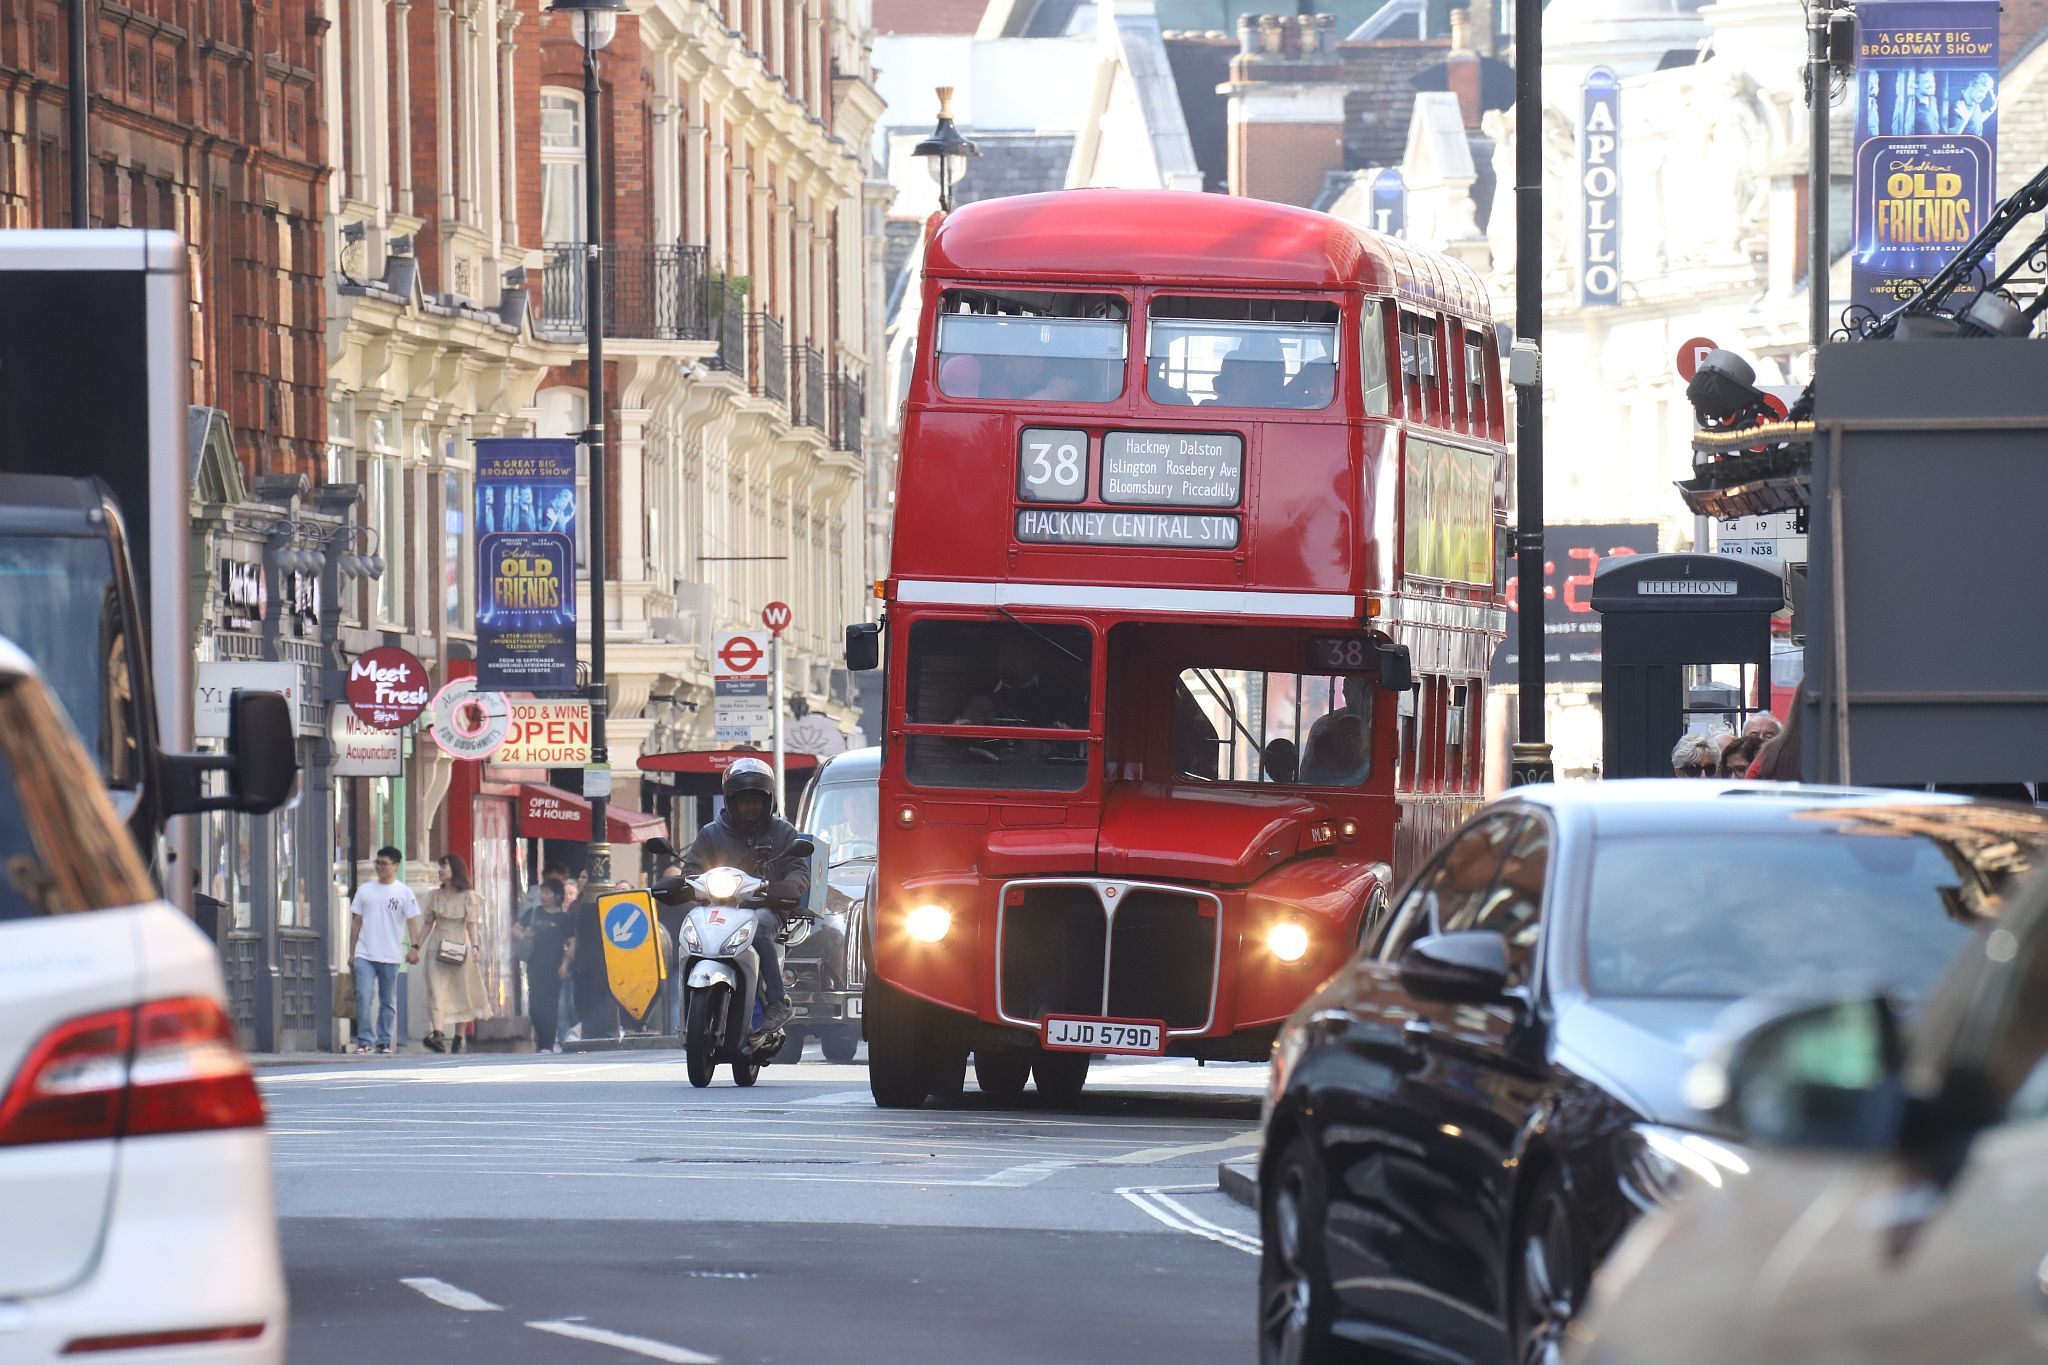 Vintage preserved bus operating route 38 in London on 16-Sep-2023. Routemaster RM. JJD579D. Shaftesbury Avenue.